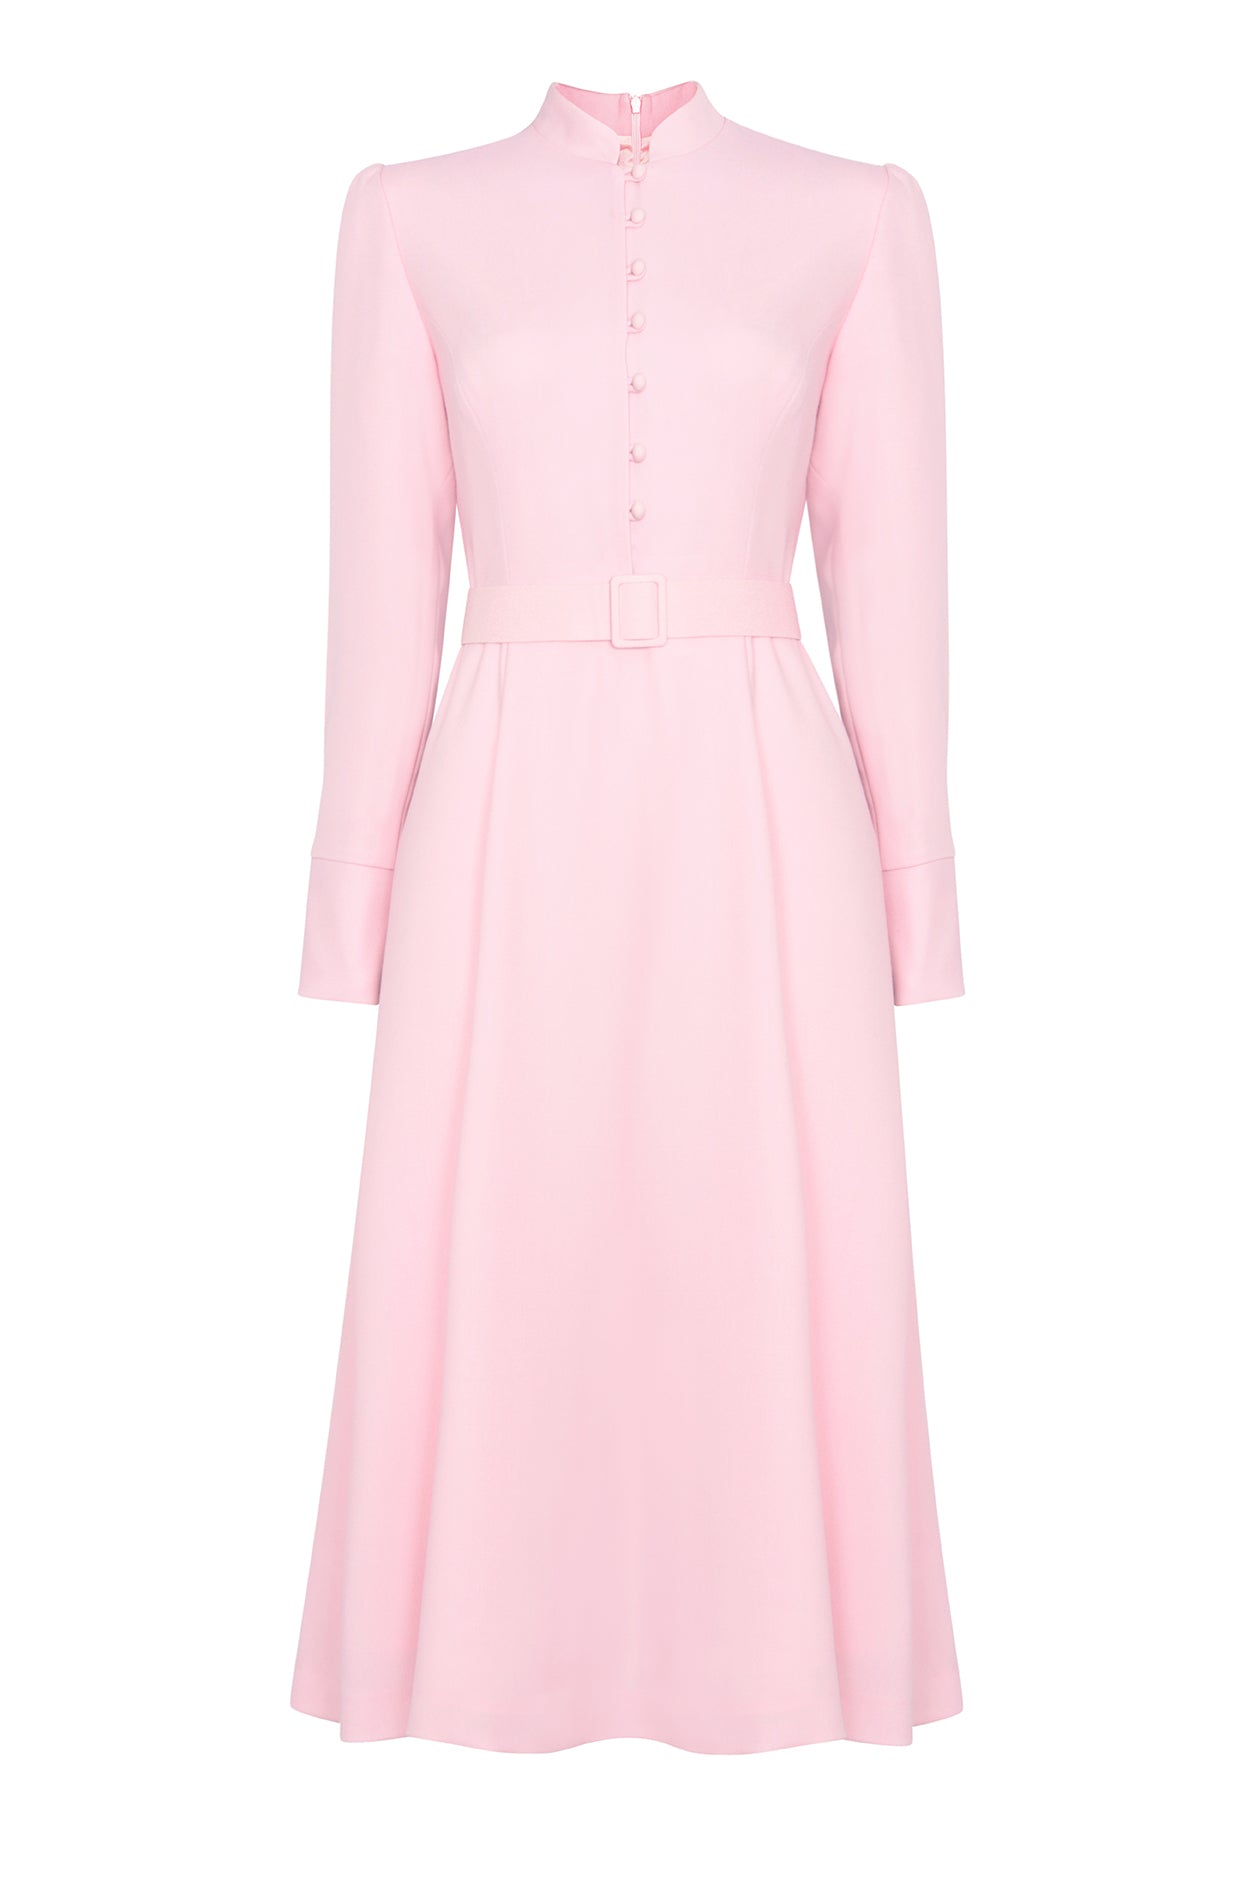 Long Sleeved Midi Dress in Pale Pink Wool Crepe Cady - Cleo | Lalage ...